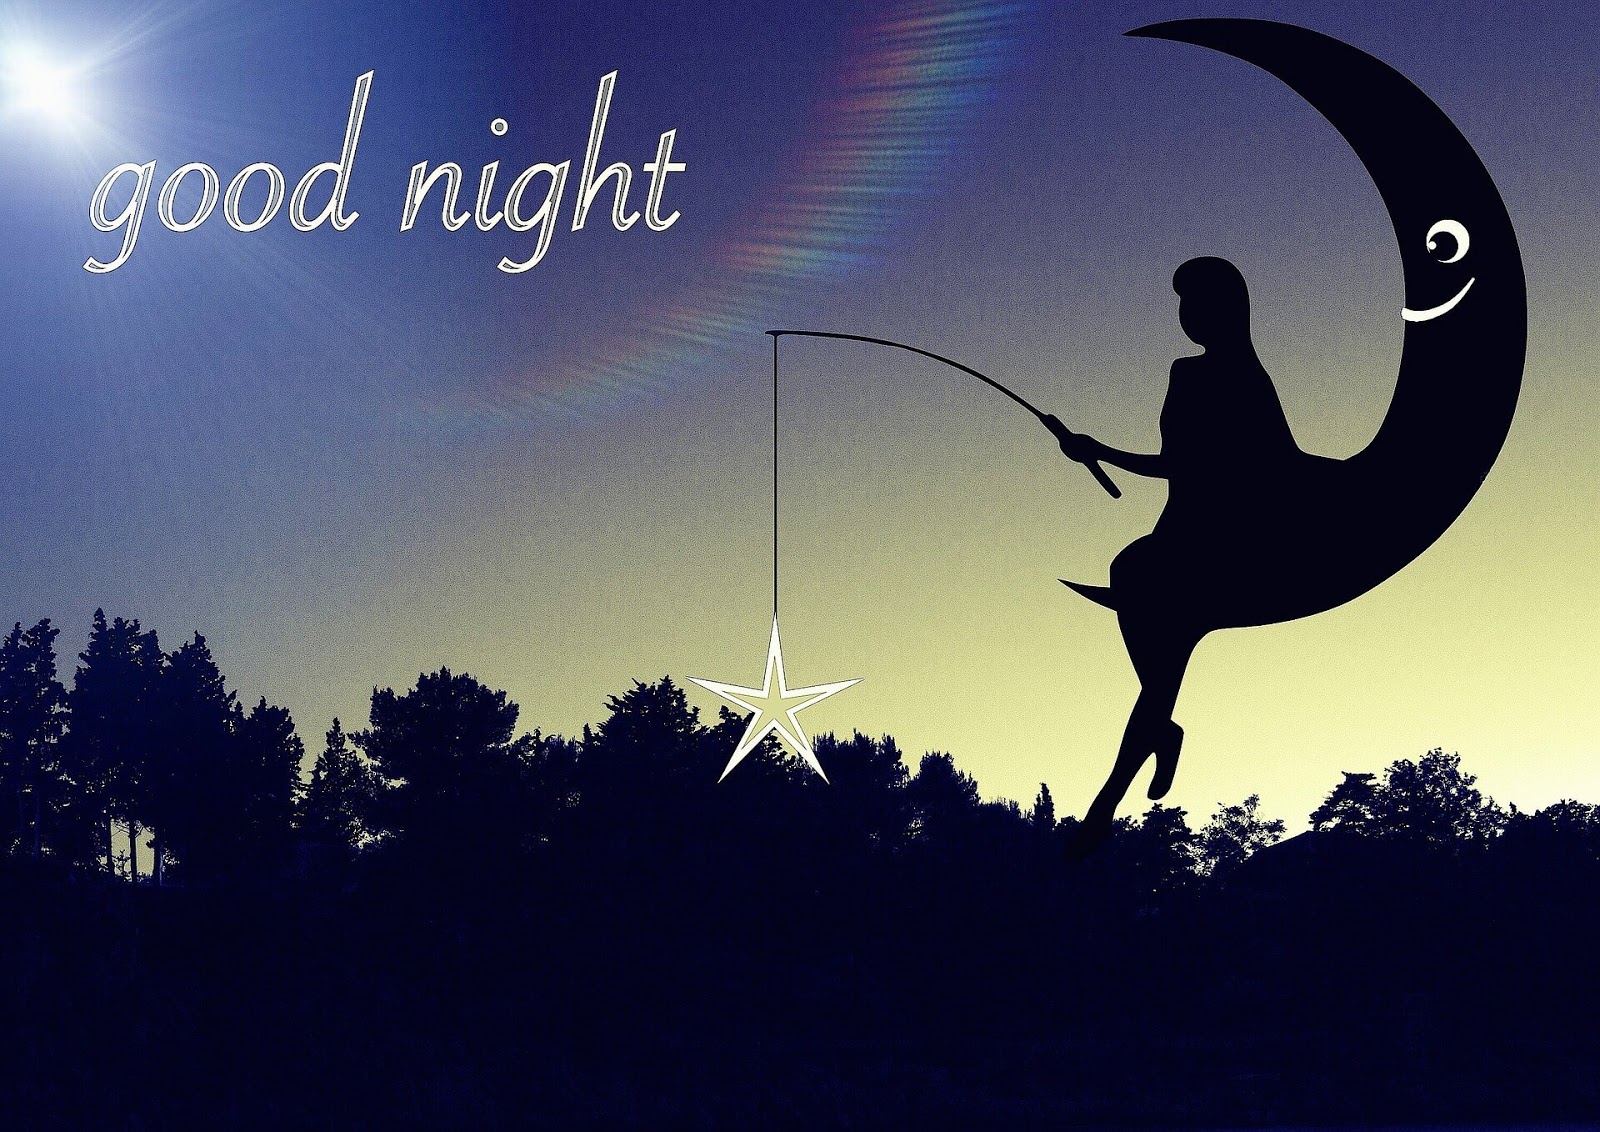 100 Good Night Images Hd Wallpapers Pics Photo Pictures - Beautiful Good Night Photo Download - HD Wallpaper 